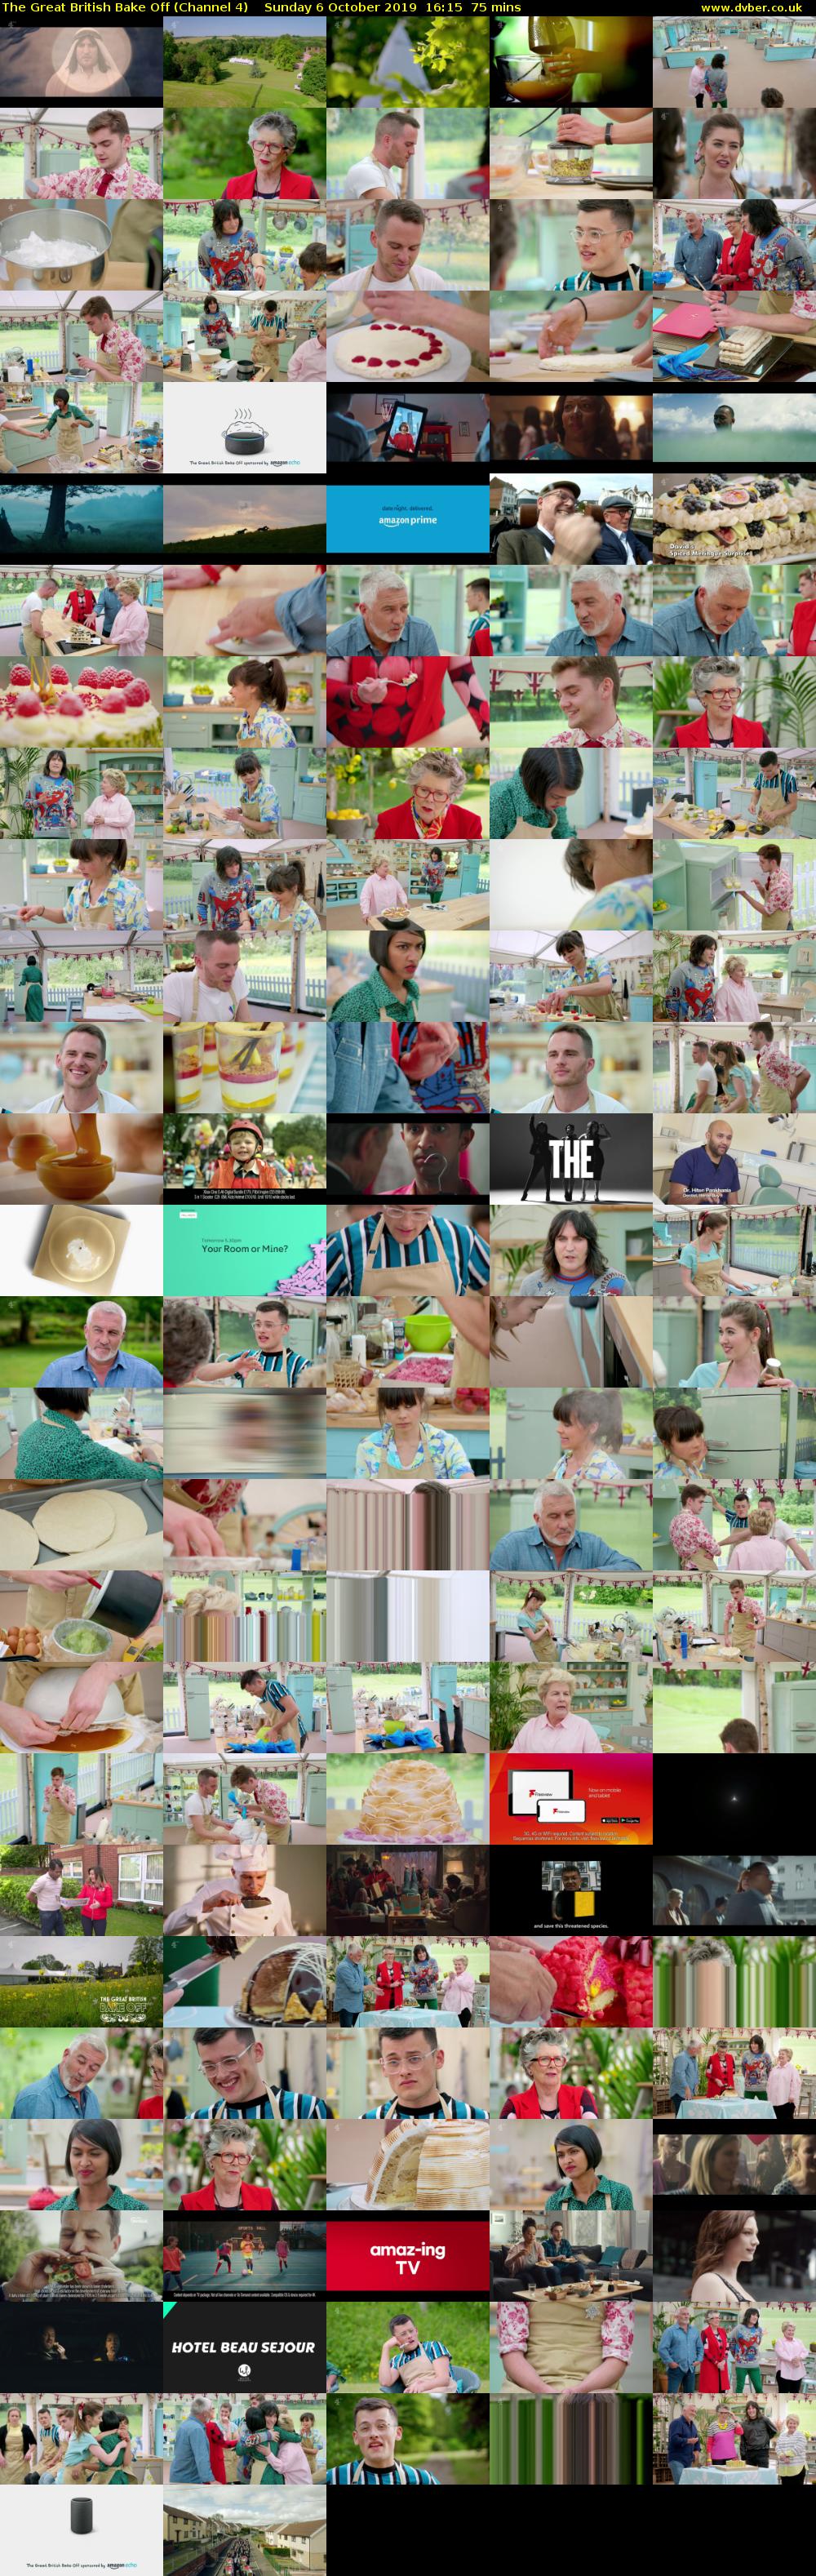 The Great British Bake Off (Channel 4) Sunday 6 October 2019 16:15 - 17:30